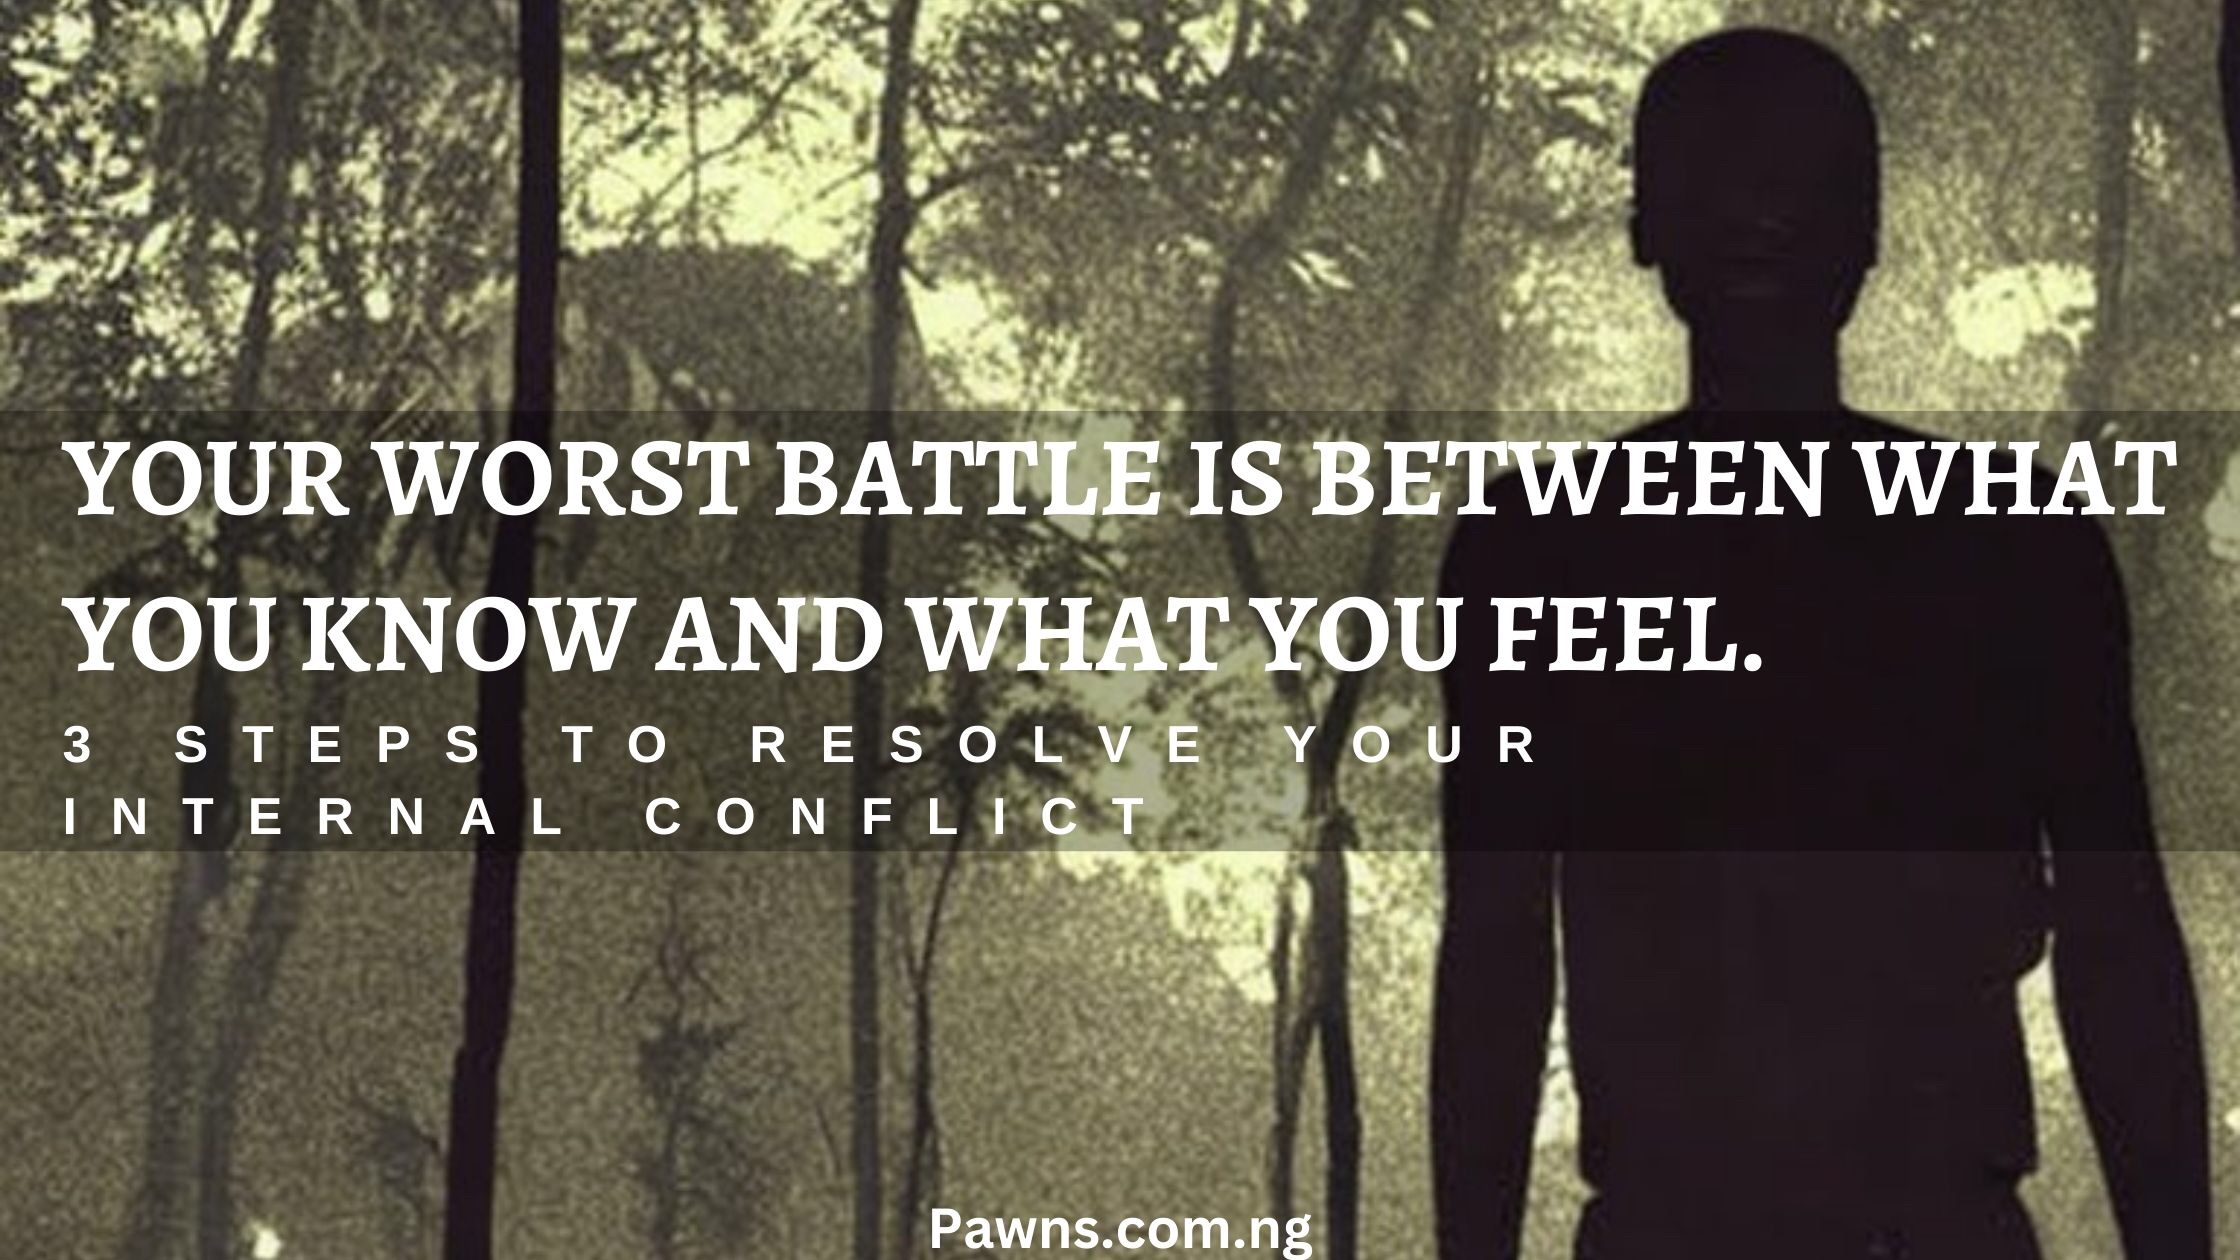 3 Steps to Resolve Your Internal Conflict